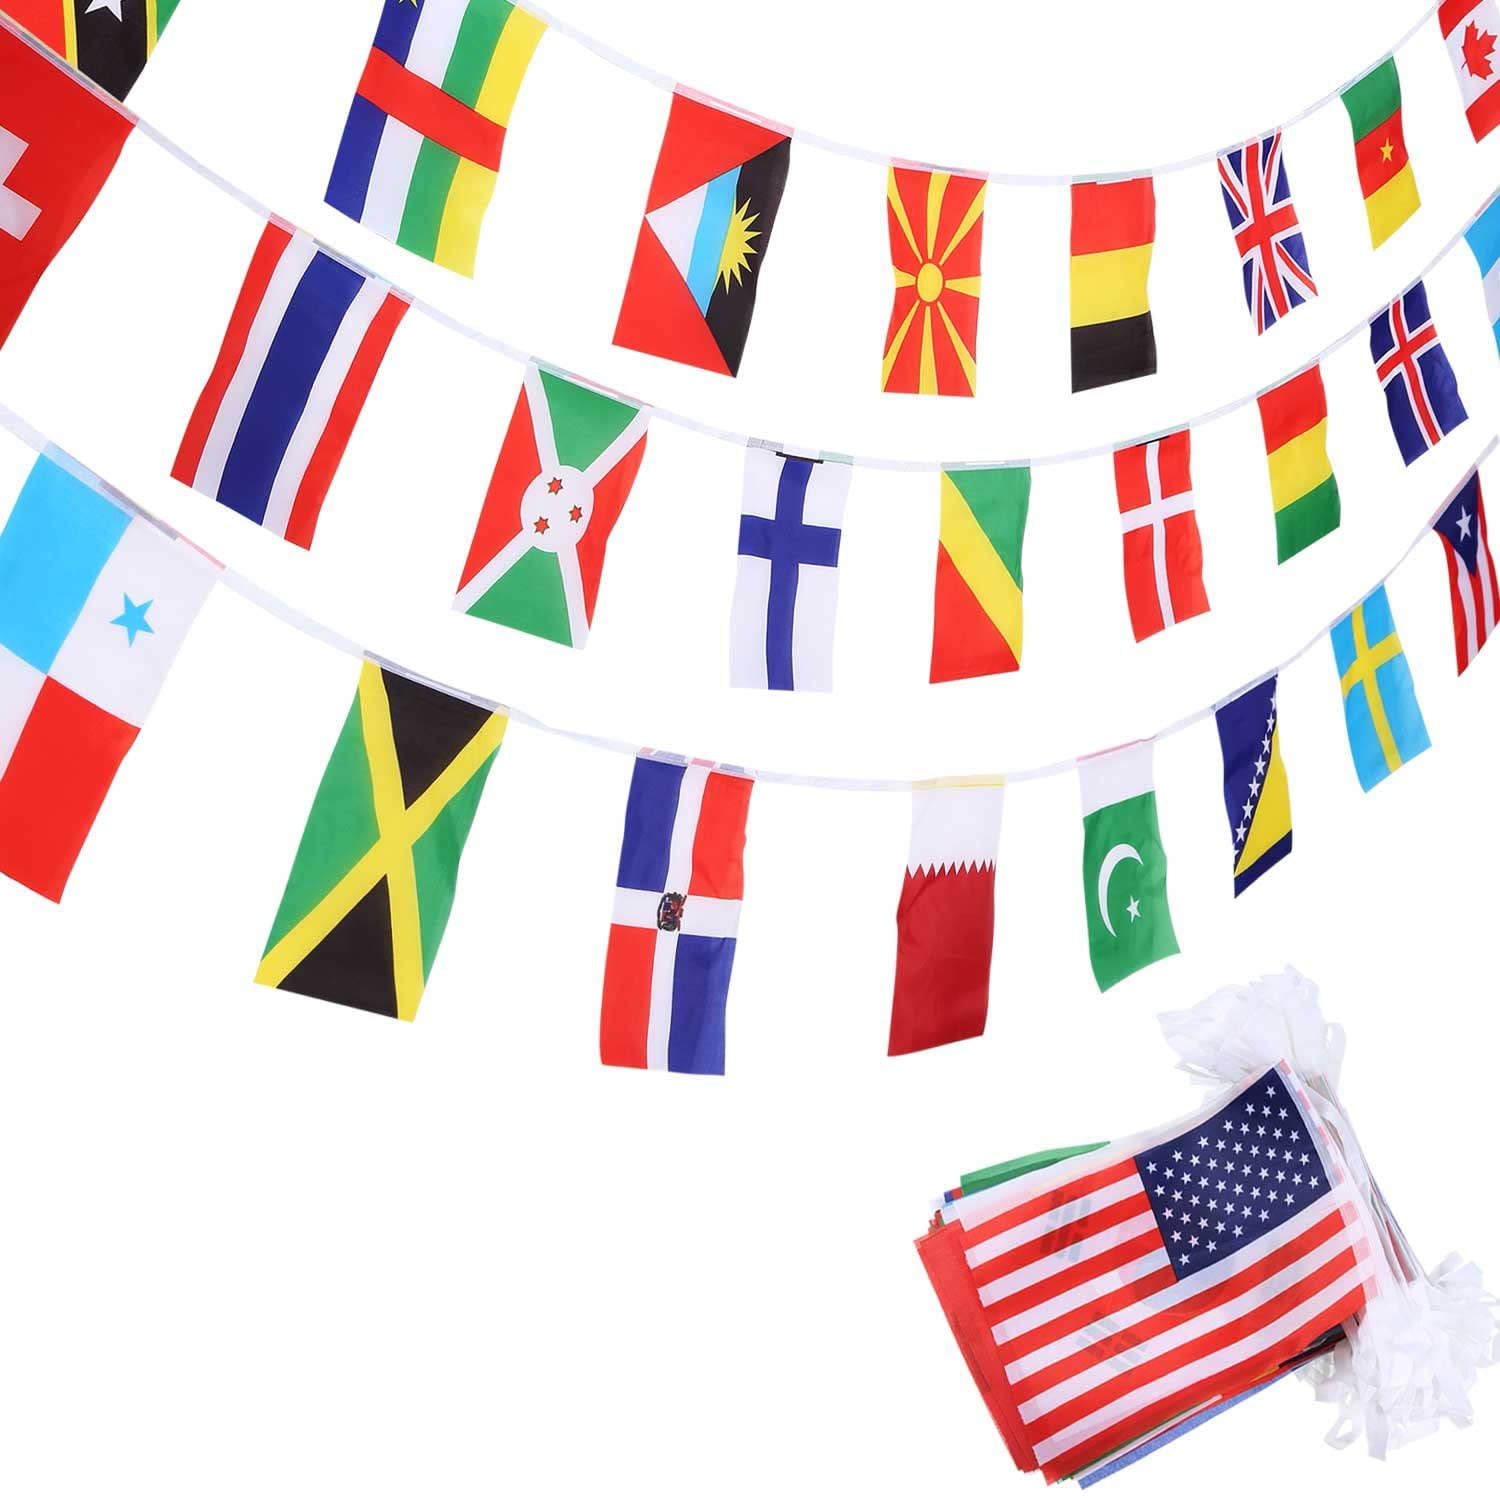 Festival Events Celebration 200 Countries Olympic Flags Pennant Banner for Bar Grand Opening G2PLUS 164 Feet 8.2 x 5.5 World Flags Party Decorations International Flags Sports Clubs 